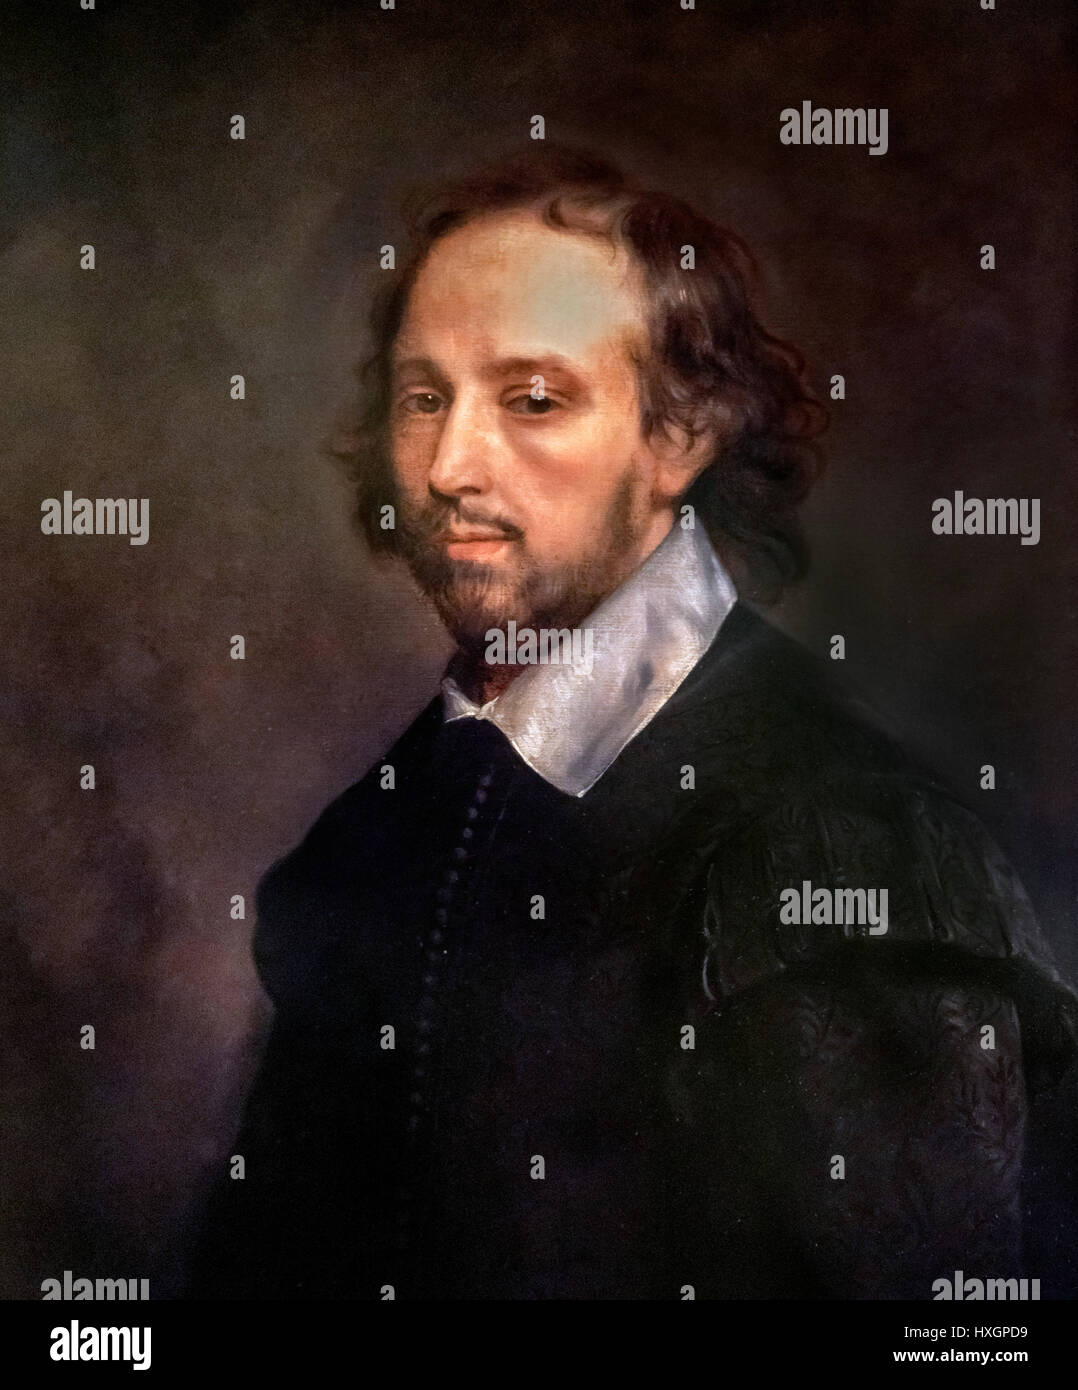 Portrait of William Shakespeare by Gerard Soest. Reproduction of a c.1667 painting which was made after Shakespeare's death and is probably based on the better known 'Chandos' portrait. Stock Photo